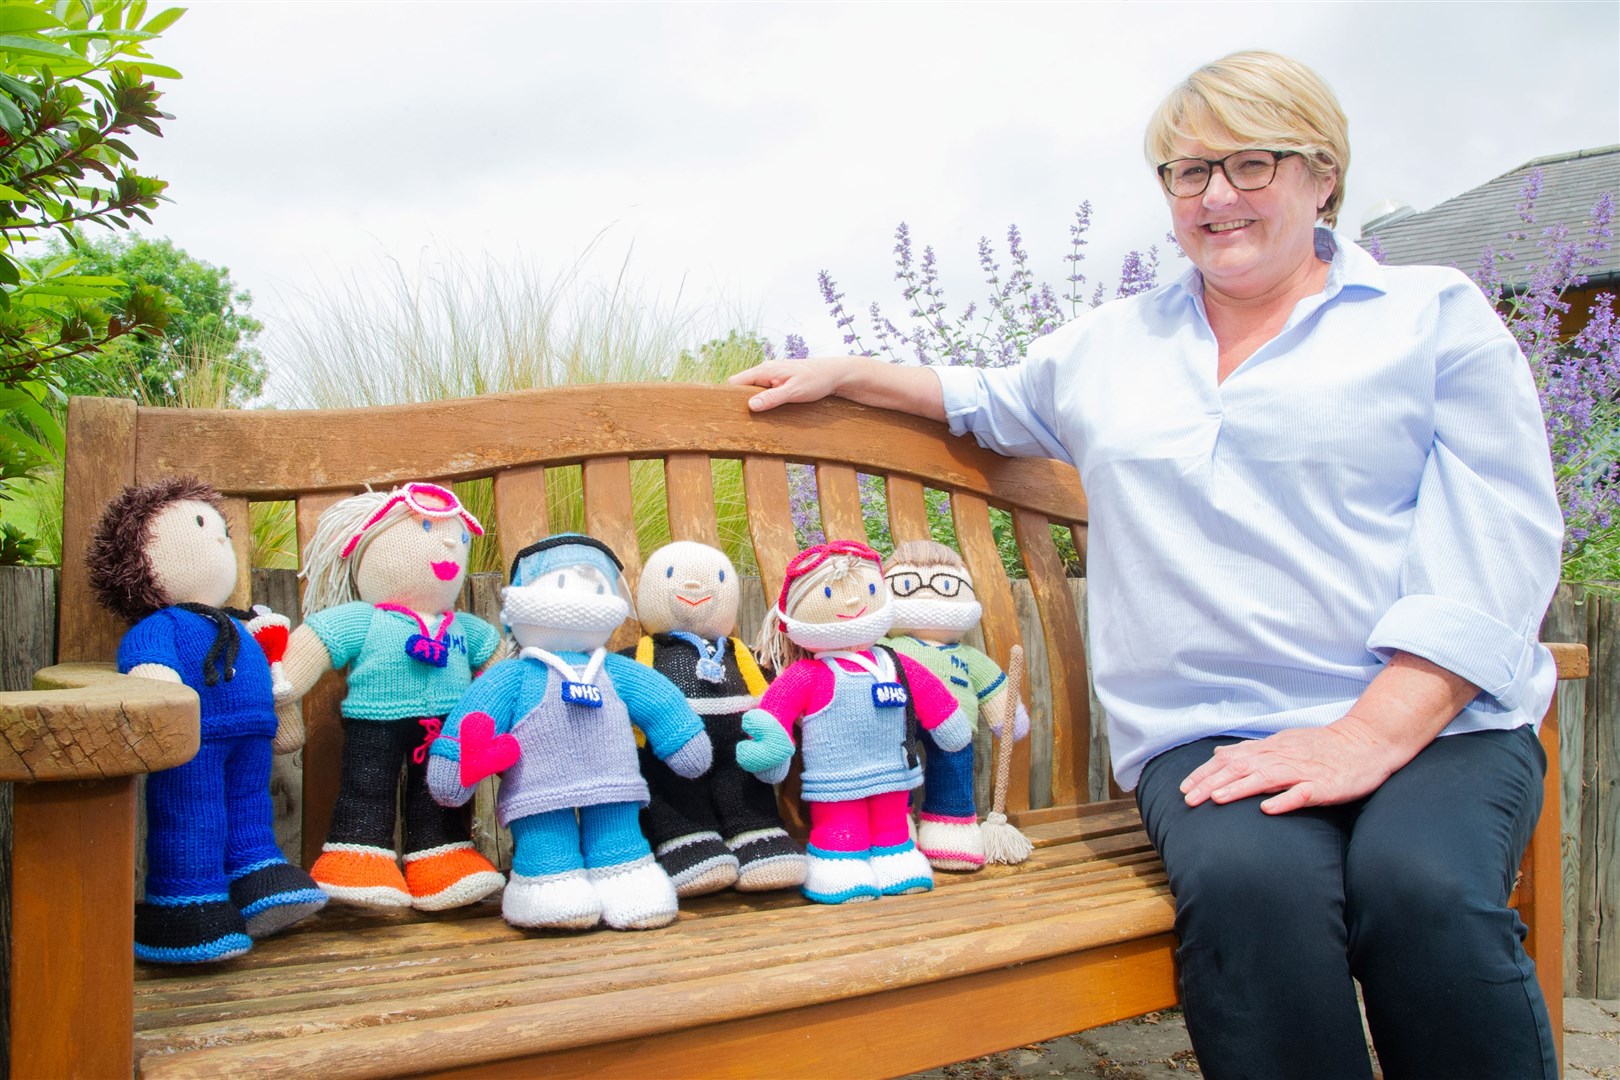 Karyn Sim,who works at The Oaks, has been busy knitting dolls of her fellow members of staff to raise money for the gardens at the care unit...Picture: Daniel Forsyth..